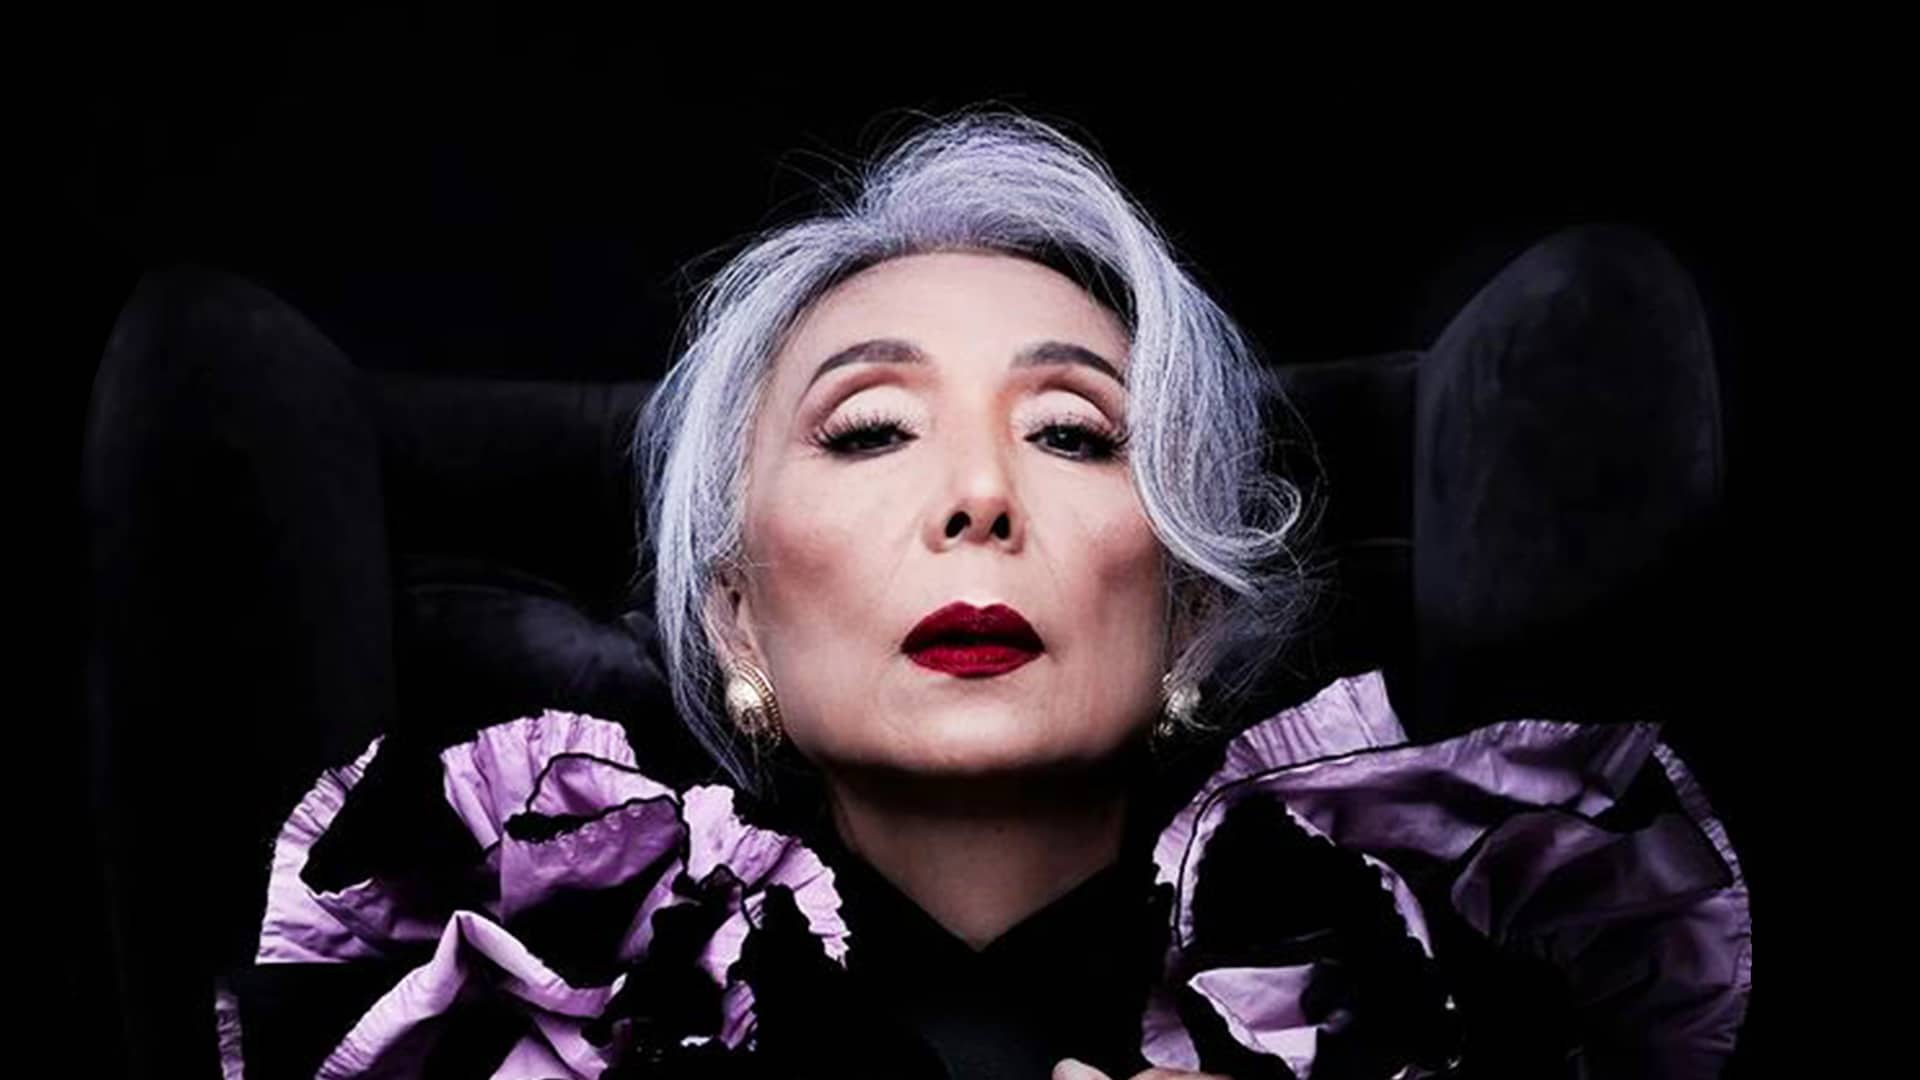 She’s a 66-year-old fashion model … who was once “a caged bird with no voice”